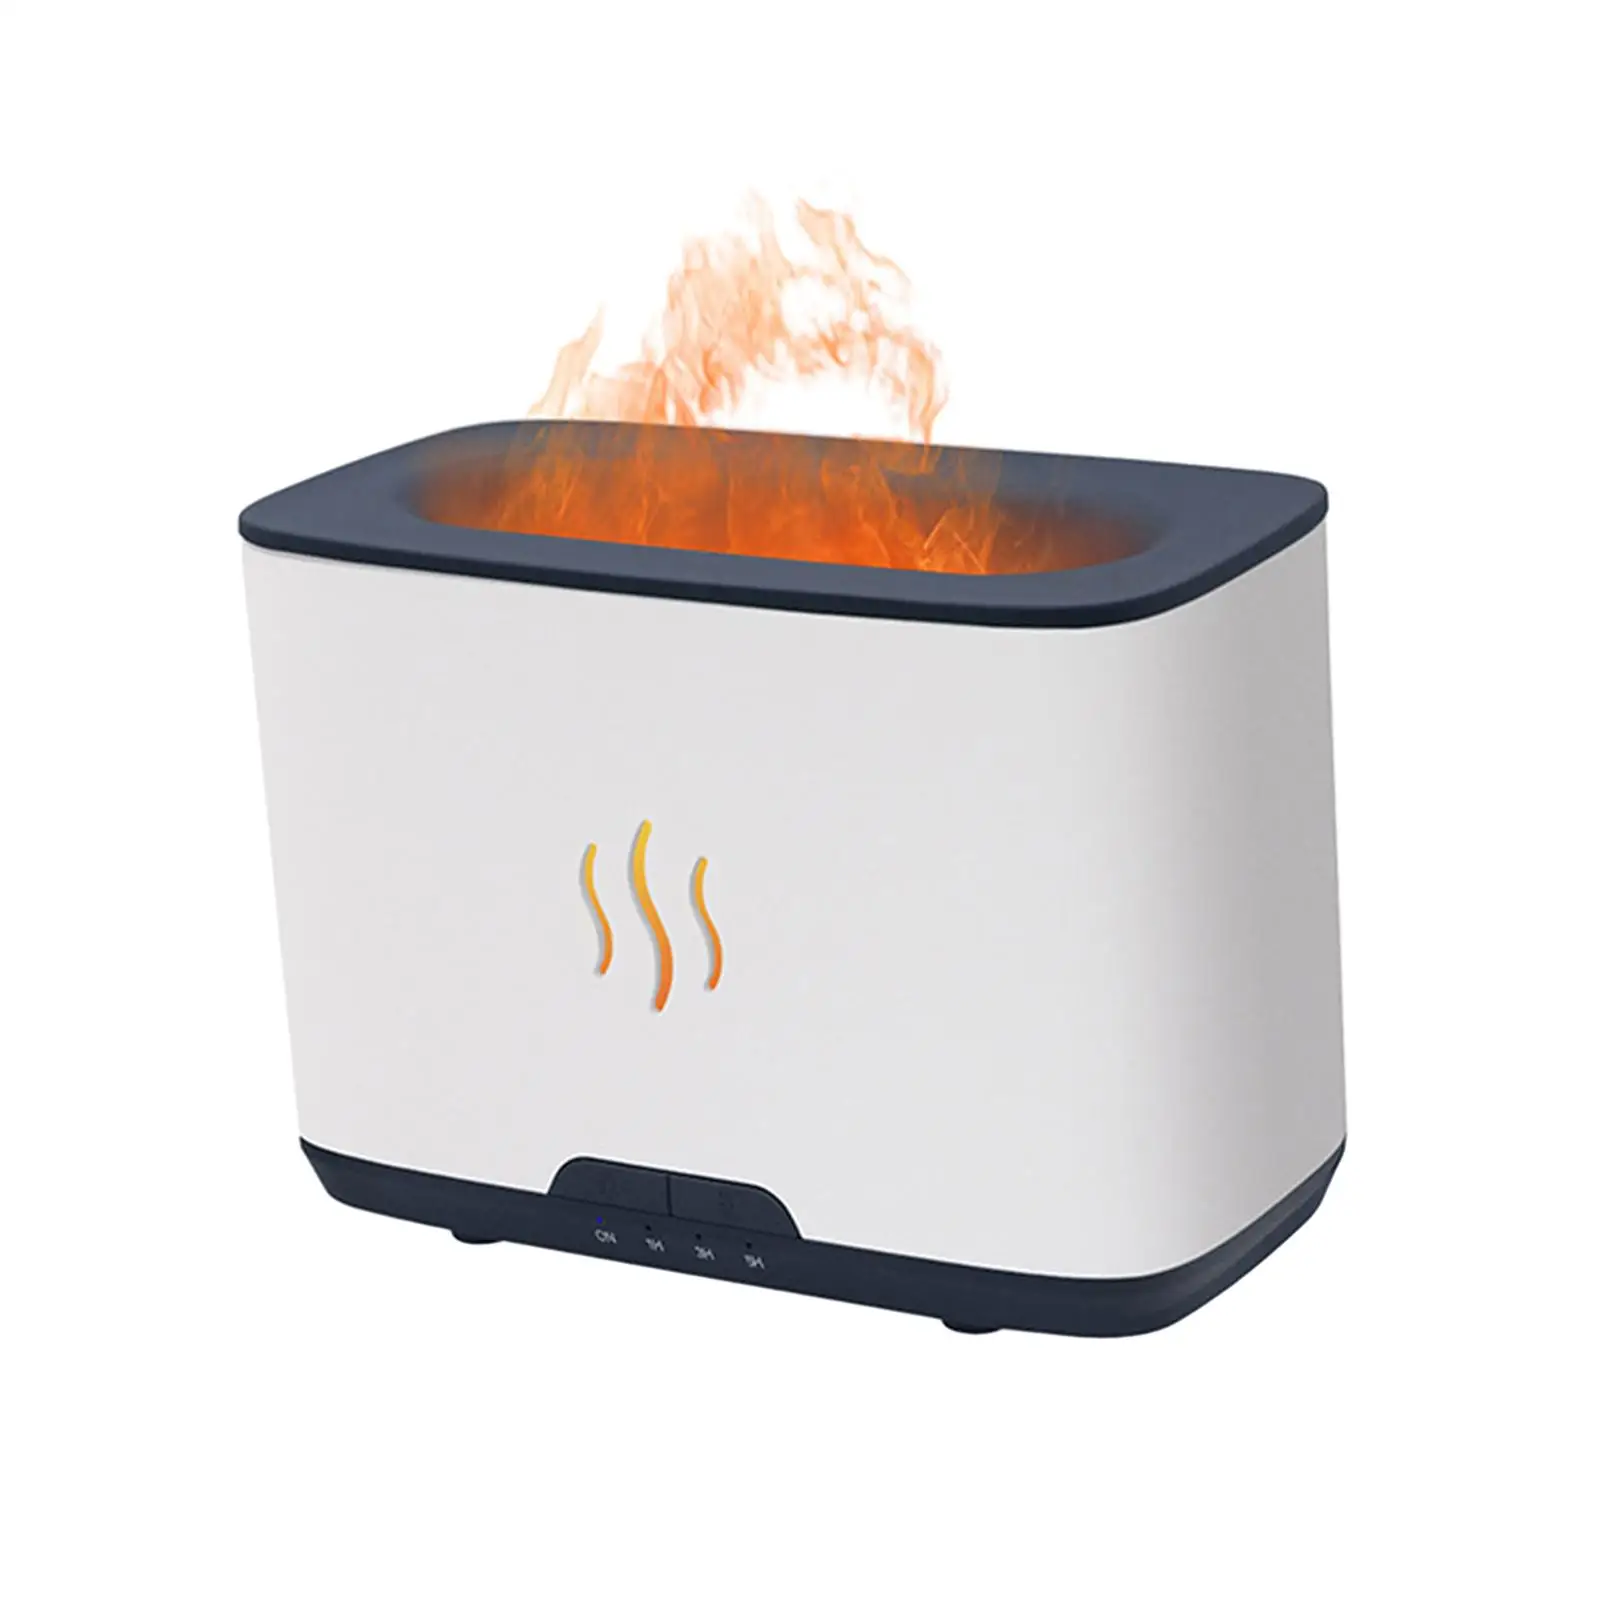 Flame Aroma Diffuser Mist Humidifier Low Noise Compact USB Essential Oil Aroma Diffuser for Yoga Livingroom Bedroom Desk